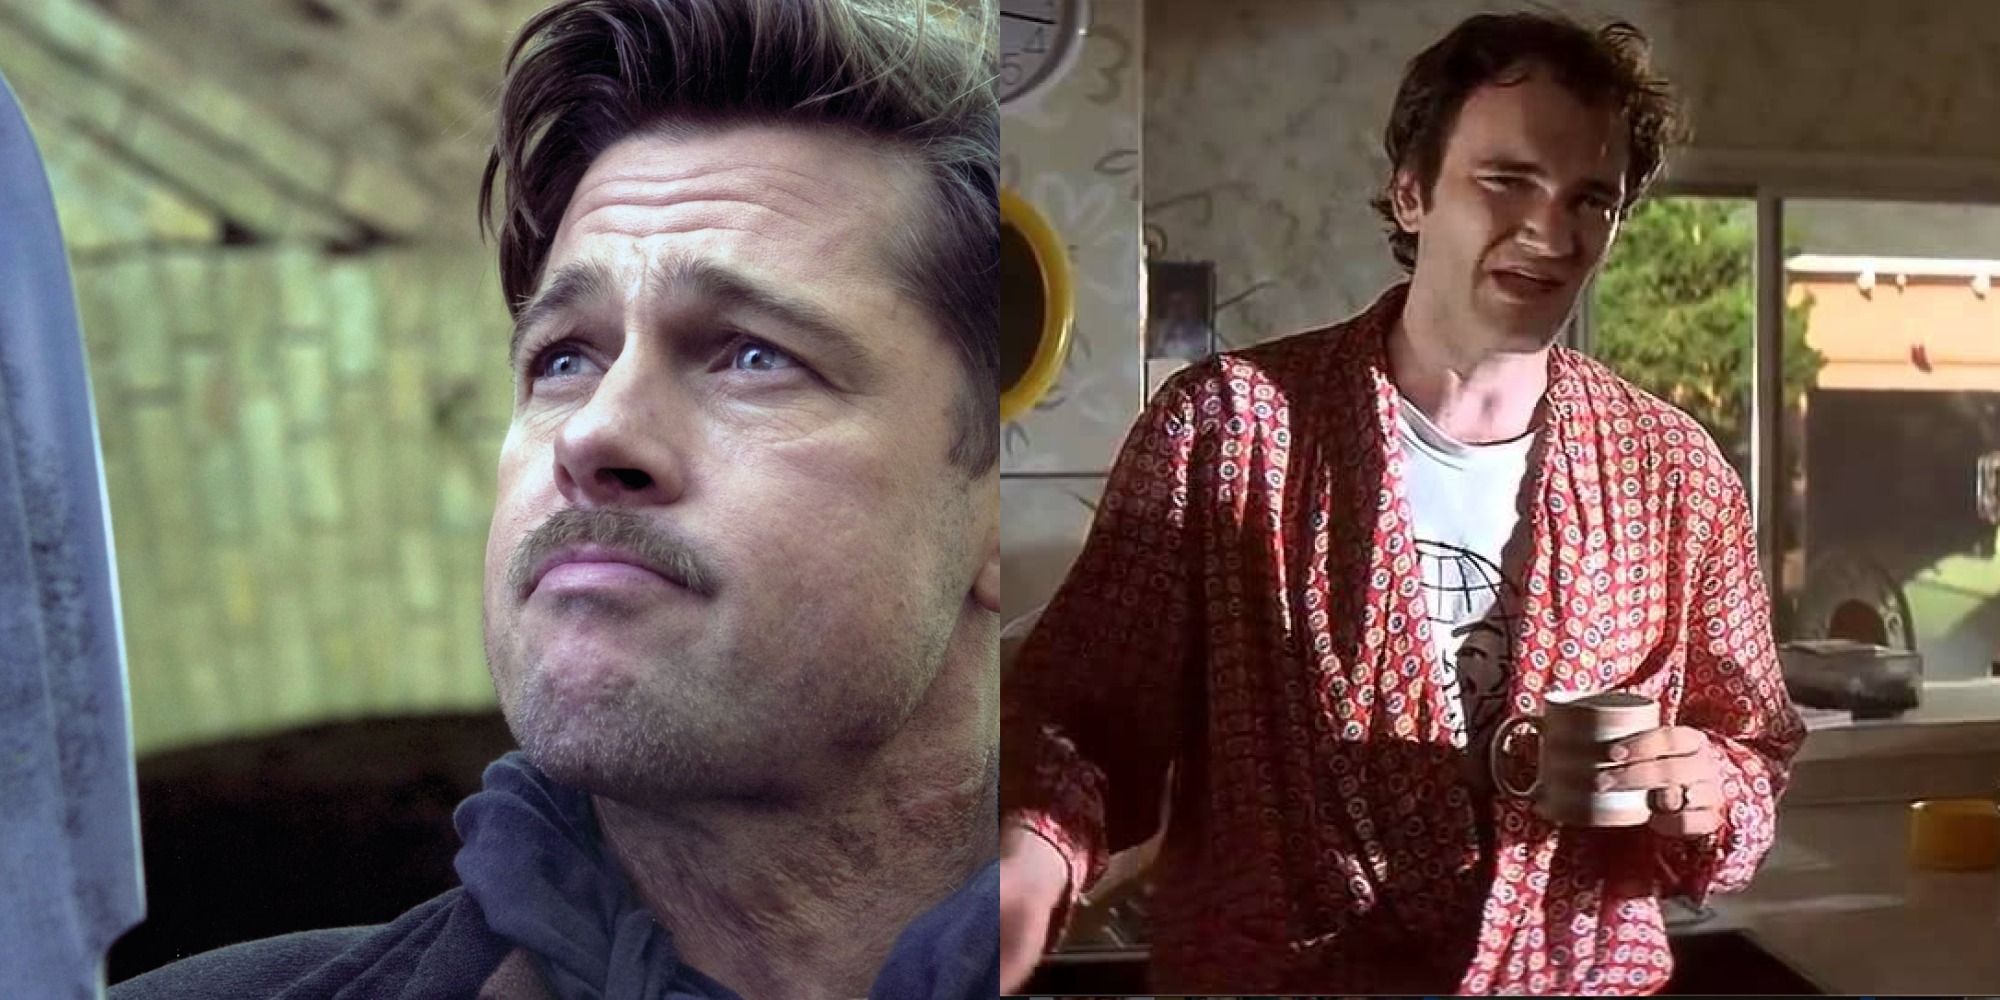 Two side by side images of Quentin Tarantino in Reservoir Dogs and Brad Pitt in Inglourious Basterds